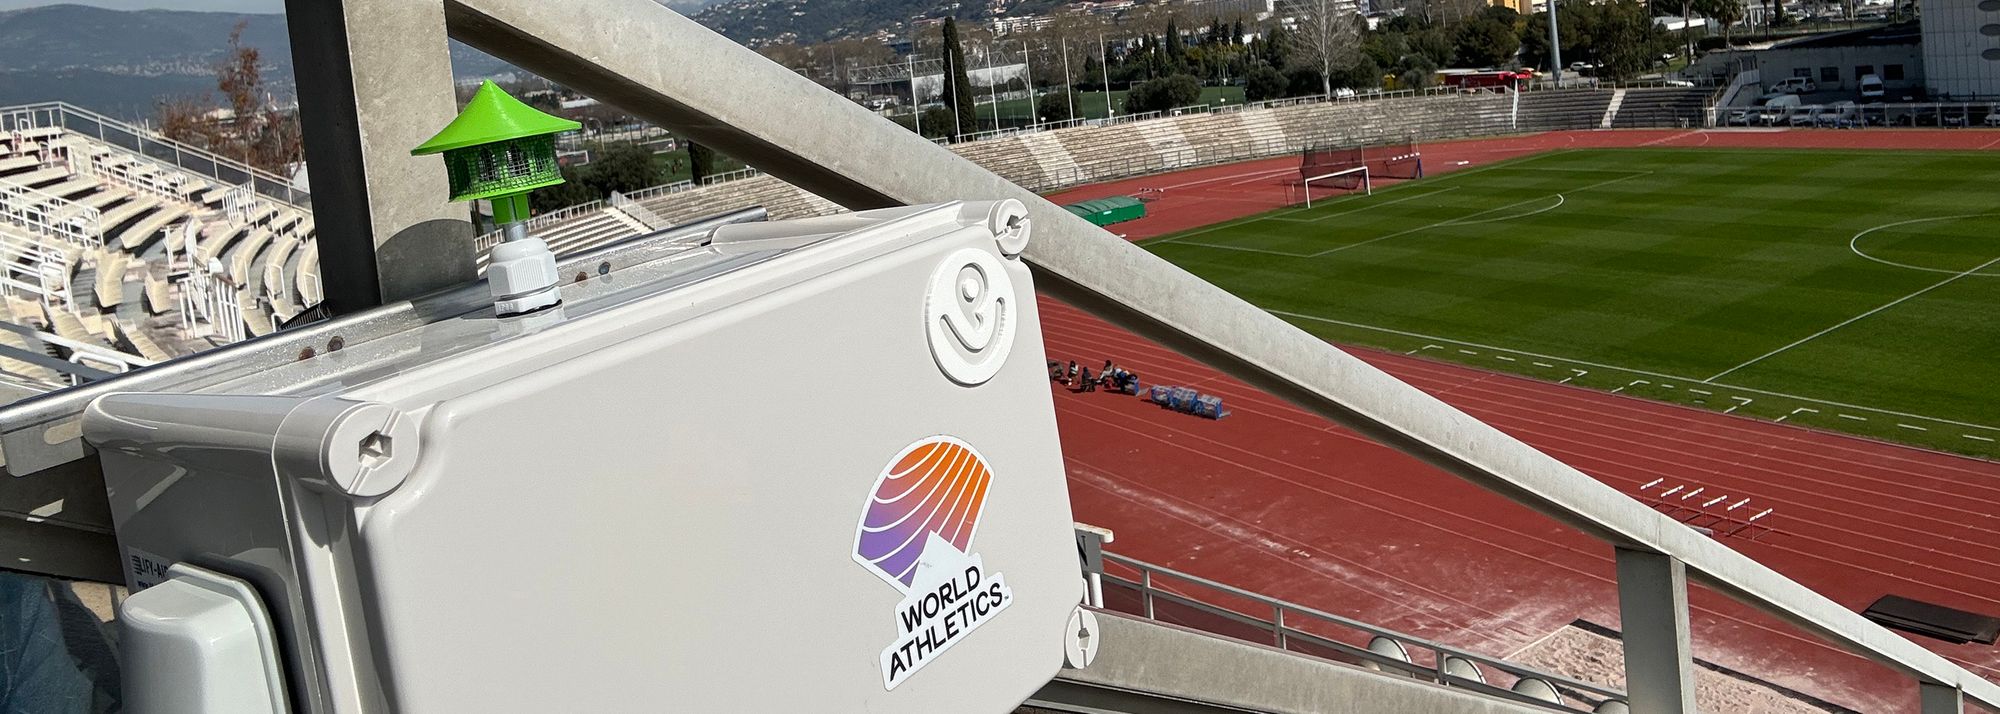 Drawing on its experience in measuring air quality in stadiums, the Health & Science Department at World Athletics has taken a new step in protecting the health of athletes